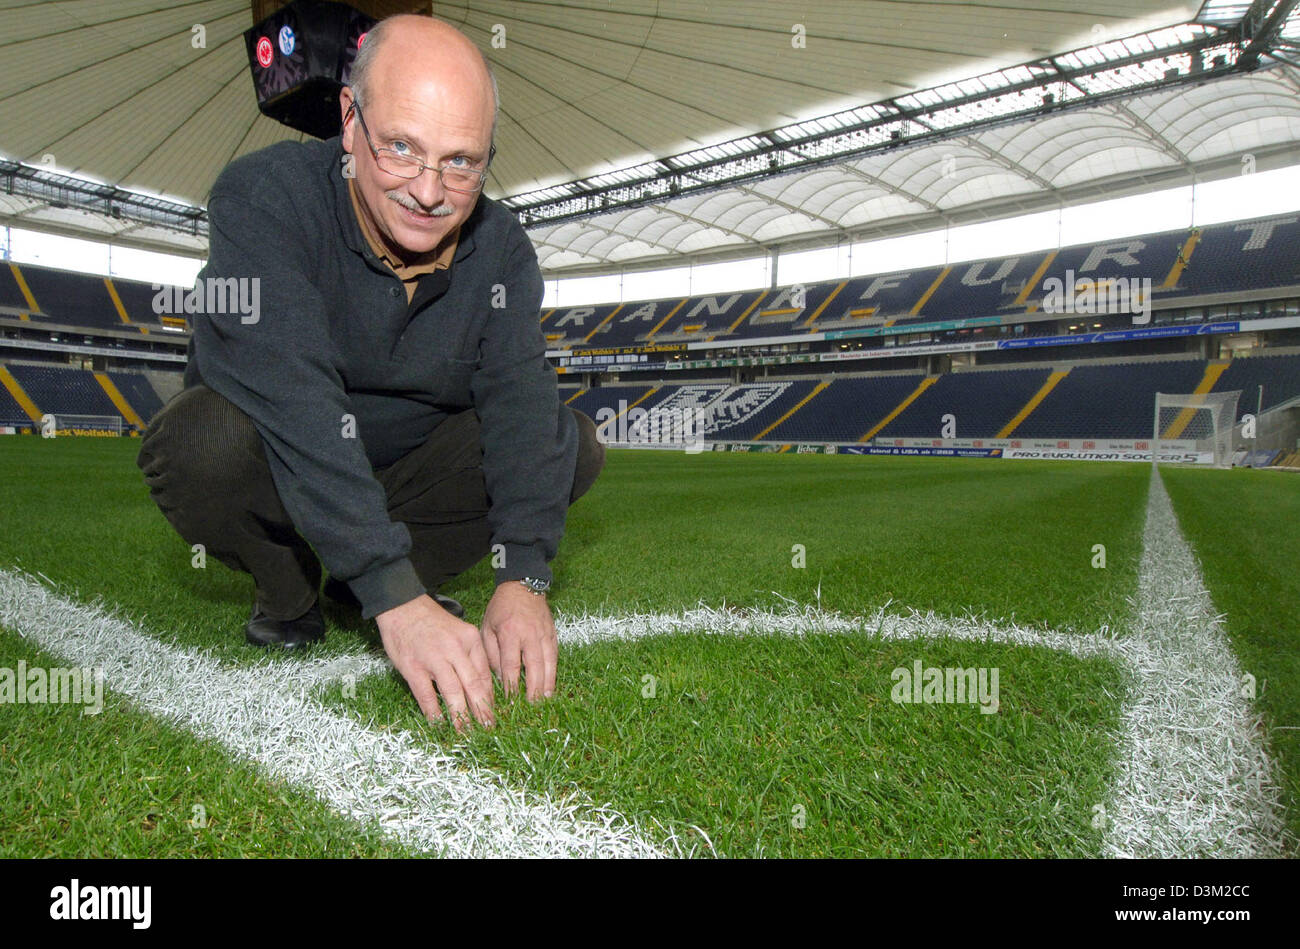 (dpa) - The picture shows Rainer Ernst smiling on the turf at the Commerzbank Arena stadium in Frankfurt Main, Germany, Tuesday 25 October 2005. Ernst is member of the so-called 'Grass expert team', which is responsible to ensure the best possible grass turf pitches inside German soccer stadiums that host FIFA World Cup matches in 2006. Photo: Werner Baum Stock Photo